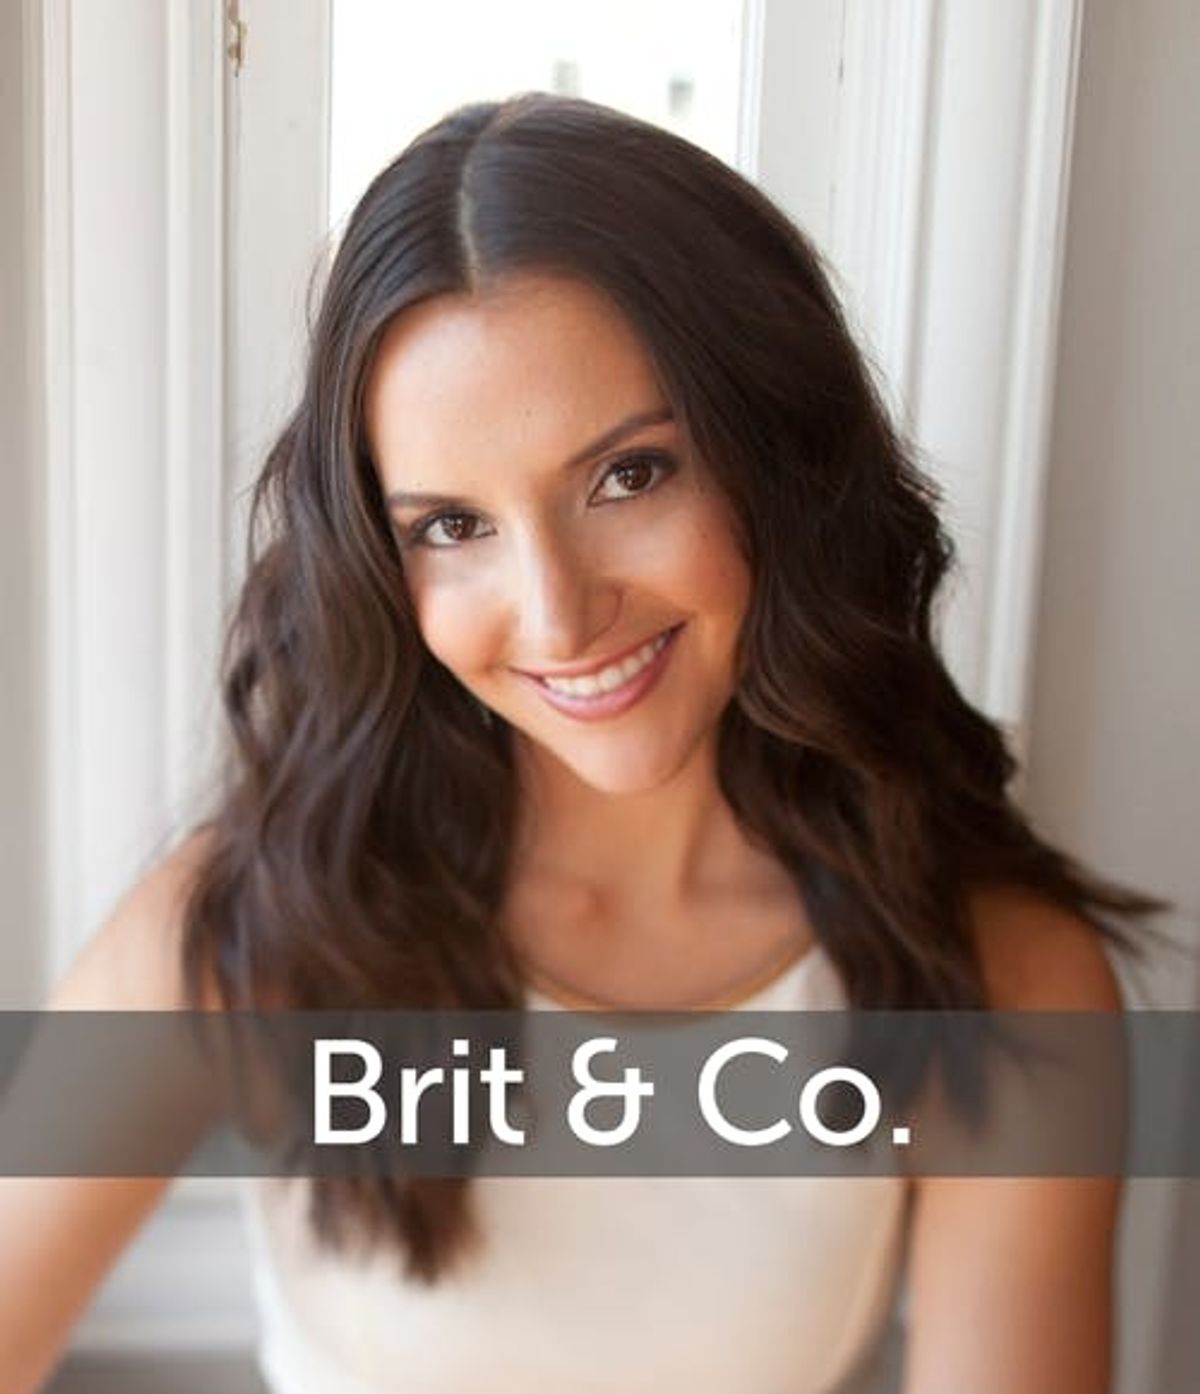 HelloBrit is now Brit & Co.